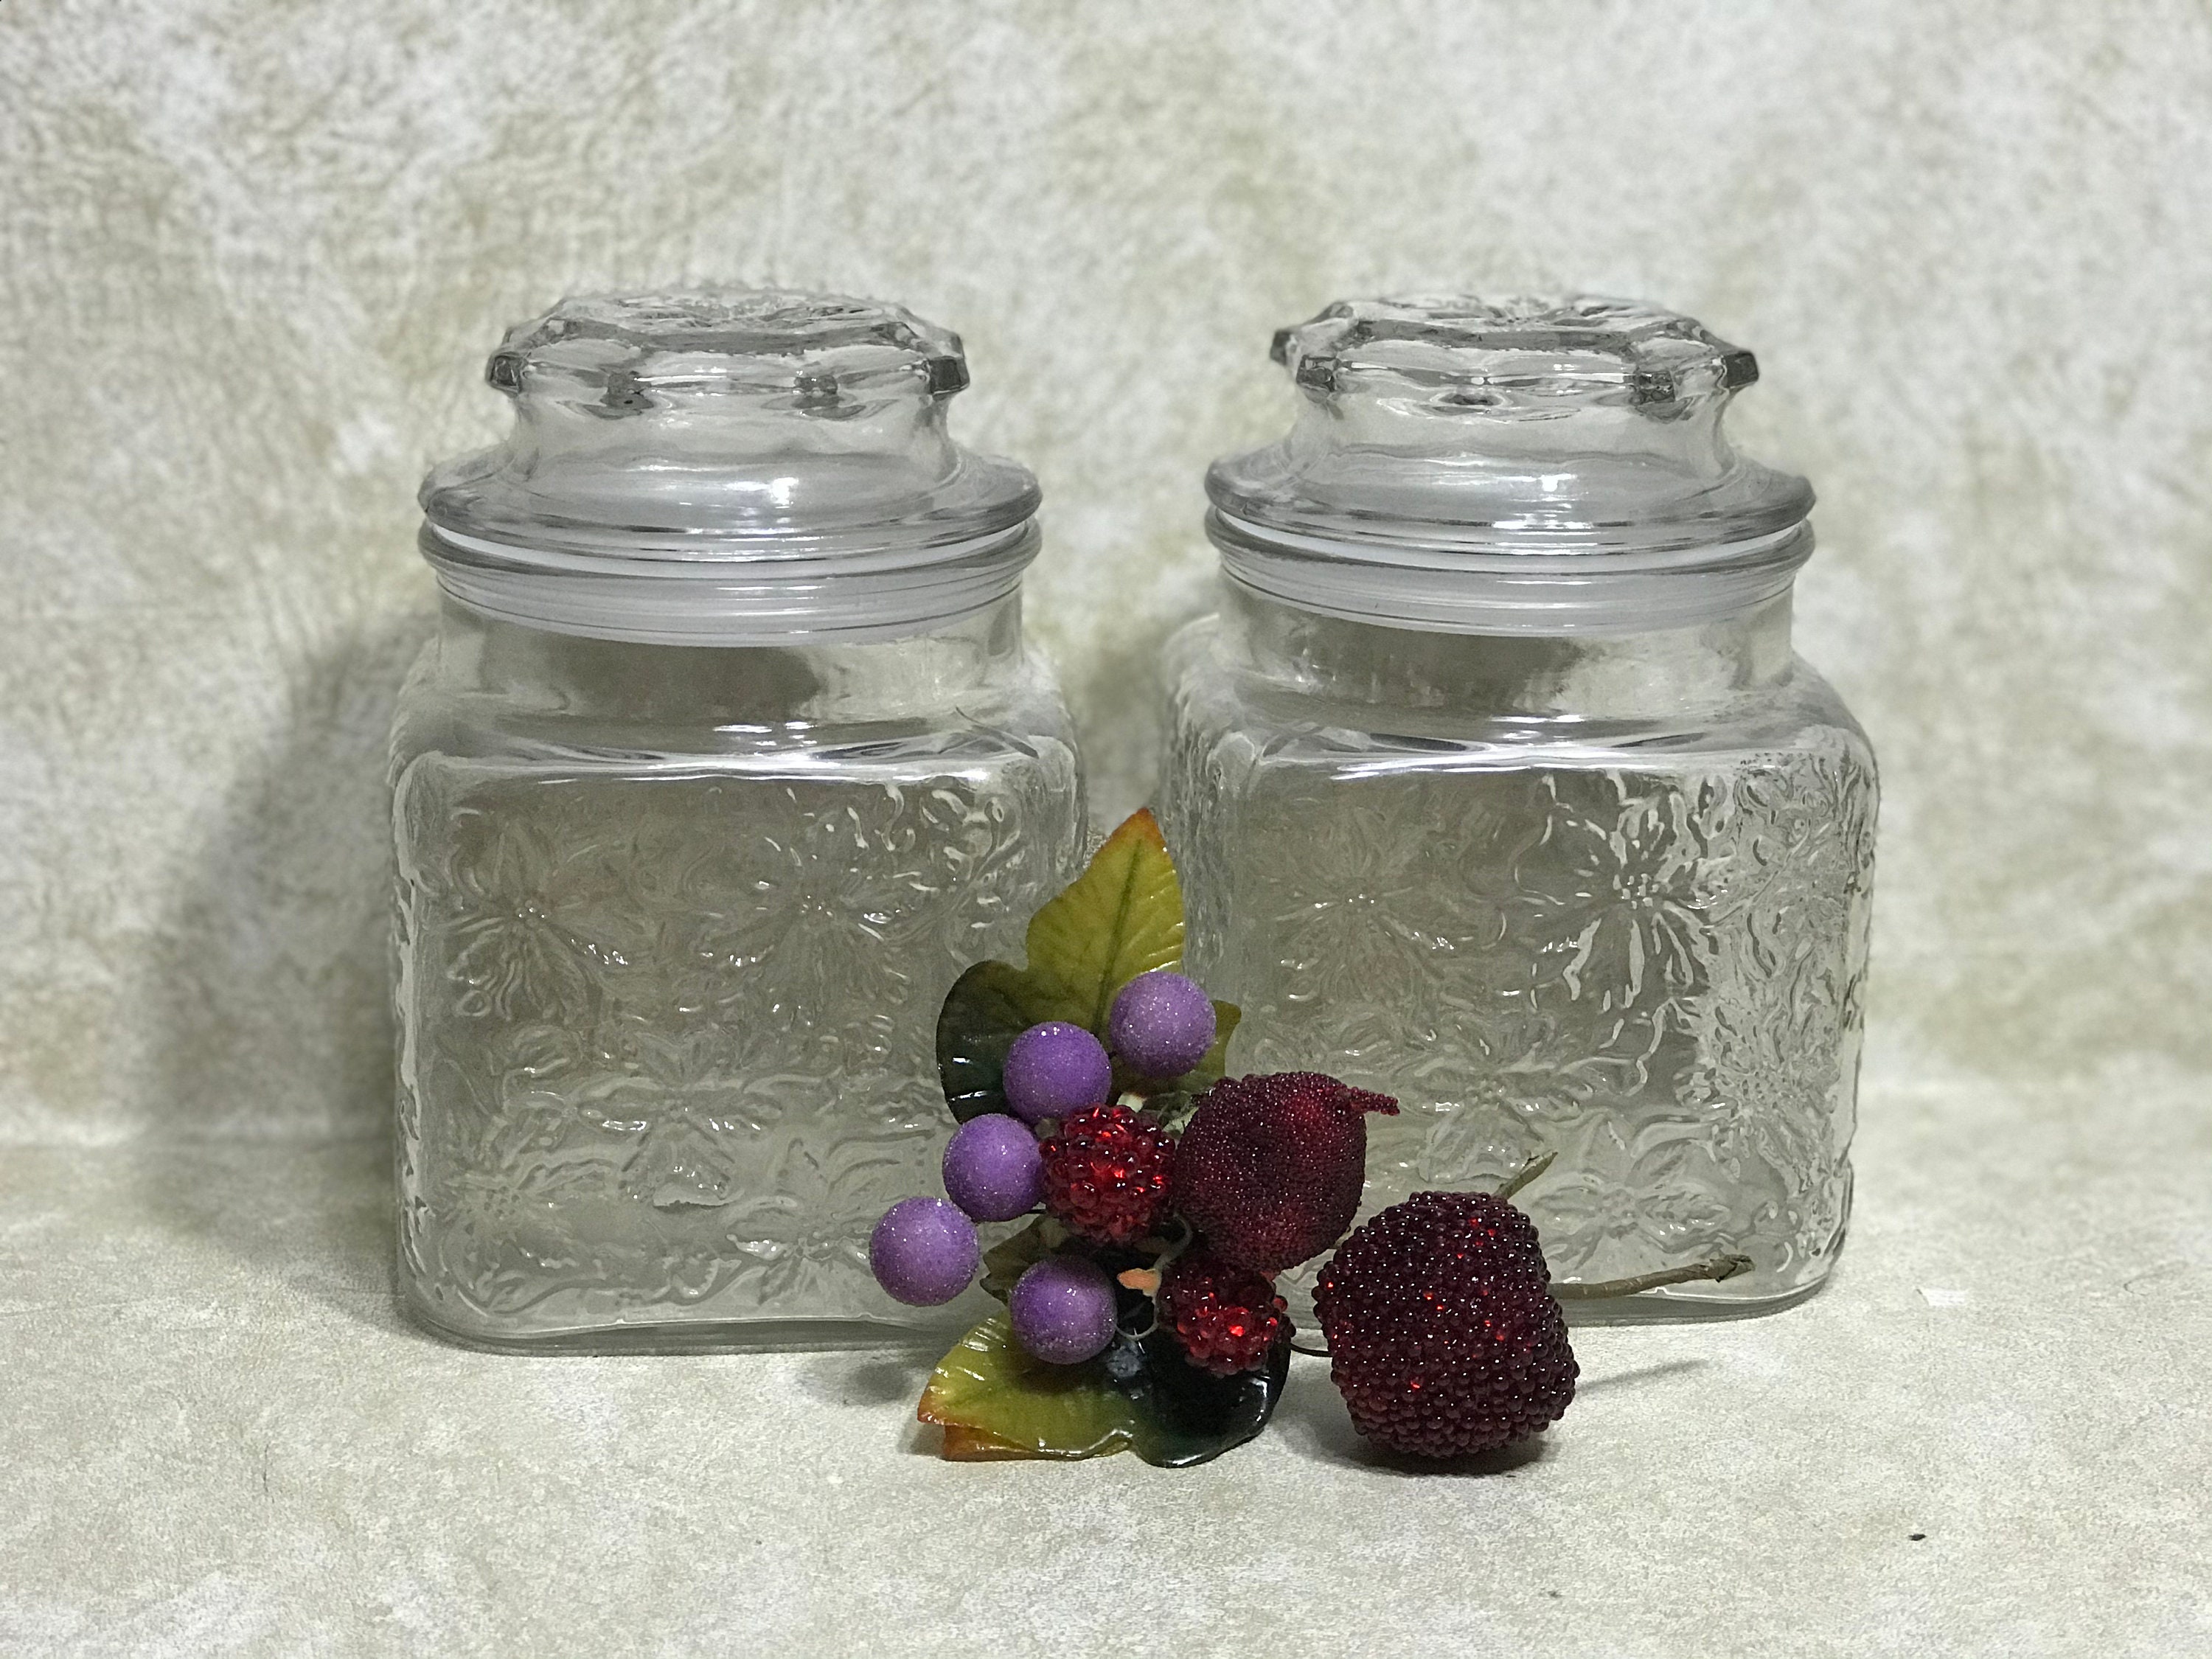 Princess House Fantasia Canisters Clear Glass Floral Storage Containers W/  Lids 3 Sizes Sold Separately Vintage, Ginger Jar Style 